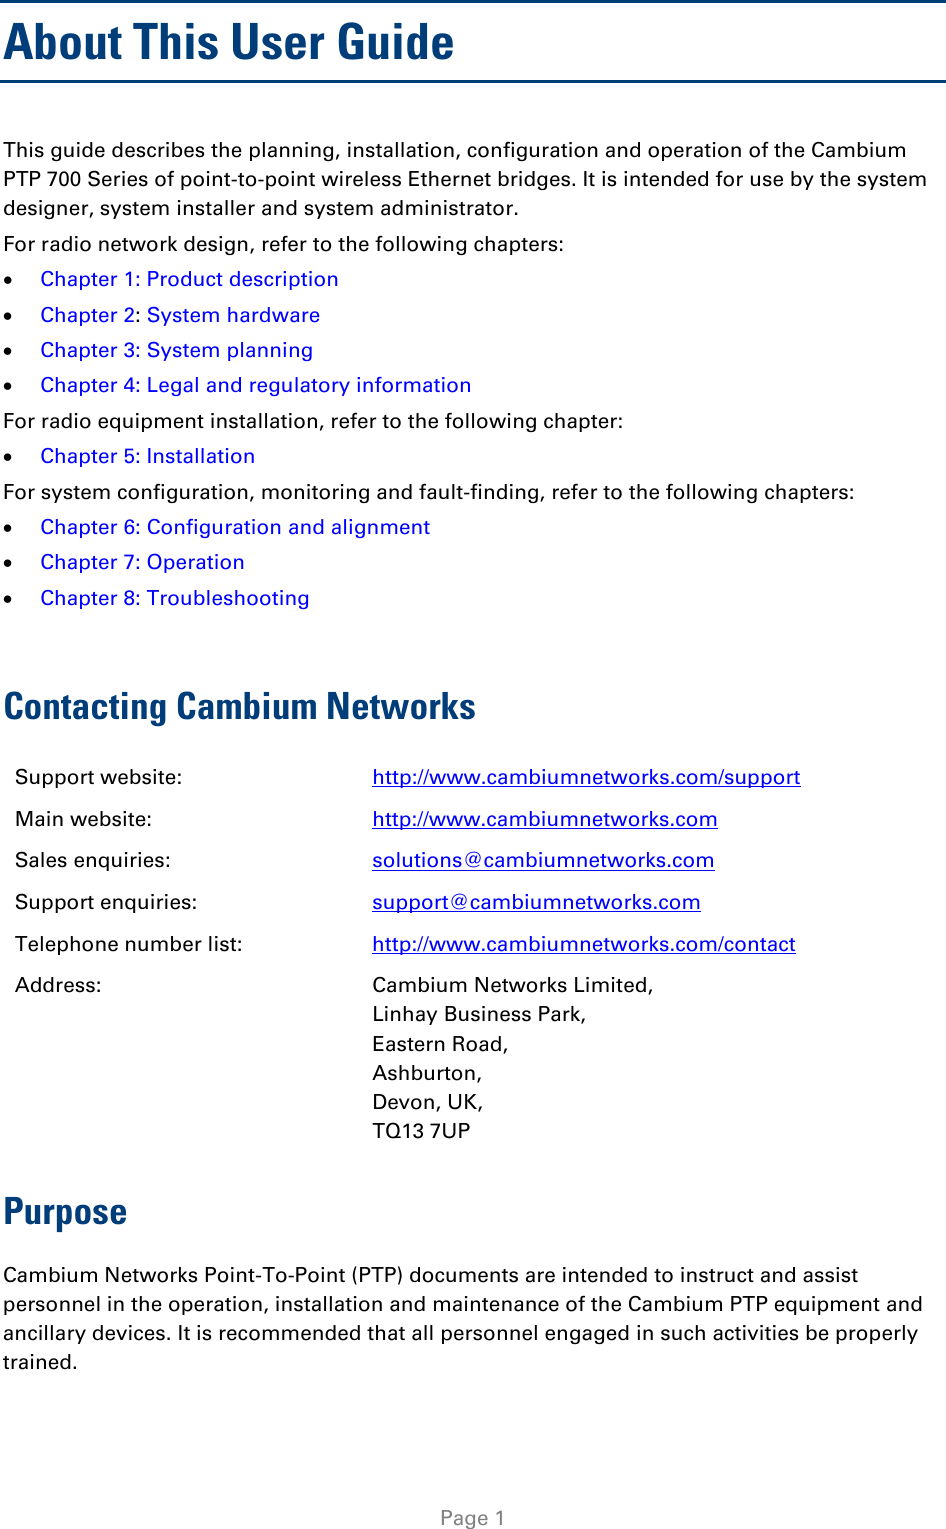  About This User Guide This guide describes the planning, installation, configuration and operation of the Cambium PTP 700 Series of point-to-point wireless Ethernet bridges. It is intended for use by the system designer, system installer and system administrator.  For radio network design, refer to the following chapters: • Chapter 1: Product description • Chapter 2: System hardware • Chapter 3: System planning • Chapter 4: Legal and regulatory information  For radio equipment installation, refer to the following chapter: • Chapter 5: Installation For system configuration, monitoring and fault-finding, refer to the following chapters: • Chapter 6: Configuration and alignment • Chapter 7: Operation • Chapter 8: Troubleshooting  Contacting Cambium Networks Support website:  http://www.cambiumnetworks.com/support Main website:  http://www.cambiumnetworks.com Sales enquiries:  solutions@cambiumnetworks.com Support enquiries:  support@cambiumnetworks.com Telephone number list: http://www.cambiumnetworks.com/contact Address:  Cambium Networks Limited, Linhay Business Park, Eastern Road, Ashburton, Devon, UK, TQ13 7UP Purpose Cambium Networks Point-To-Point (PTP) documents are intended to instruct and assist personnel in the operation, installation and maintenance of the Cambium PTP equipment and ancillary devices. It is recommended that all personnel engaged in such activities be properly trained.  Page 1 